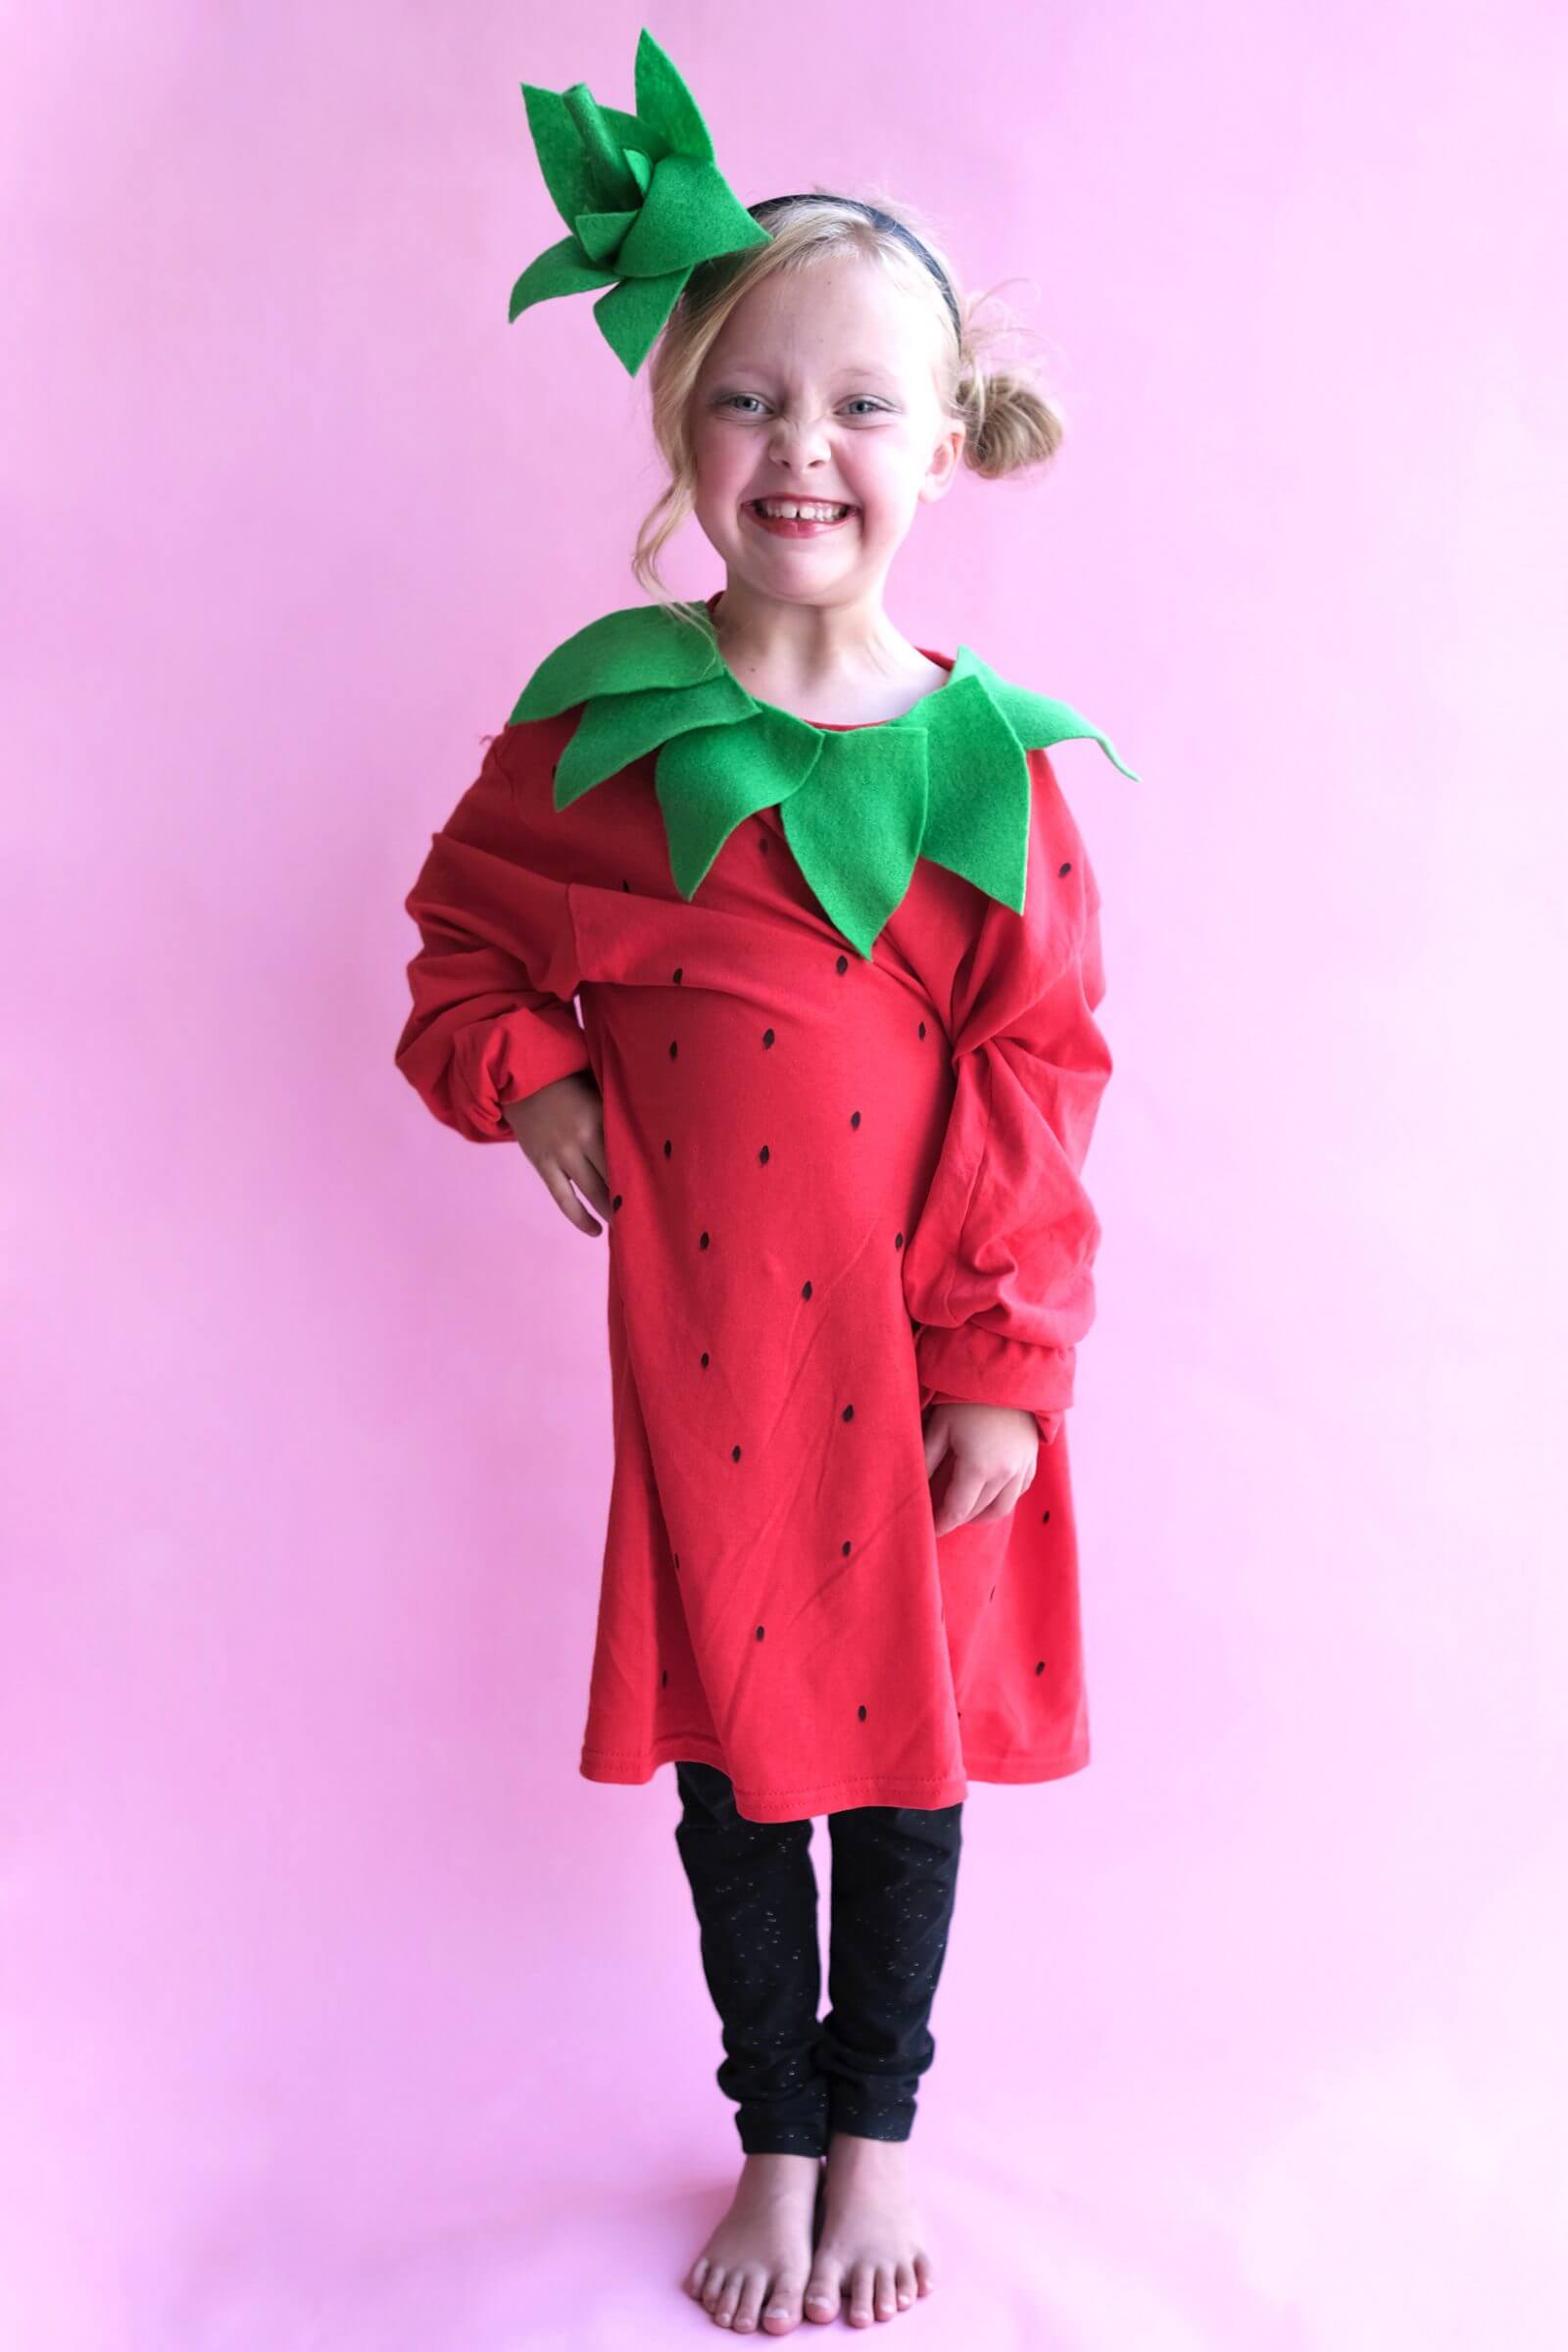 Easy To Make Strawberry Costume Craft For Kindergartners Strawberry Costume DIY Ideas for Kids